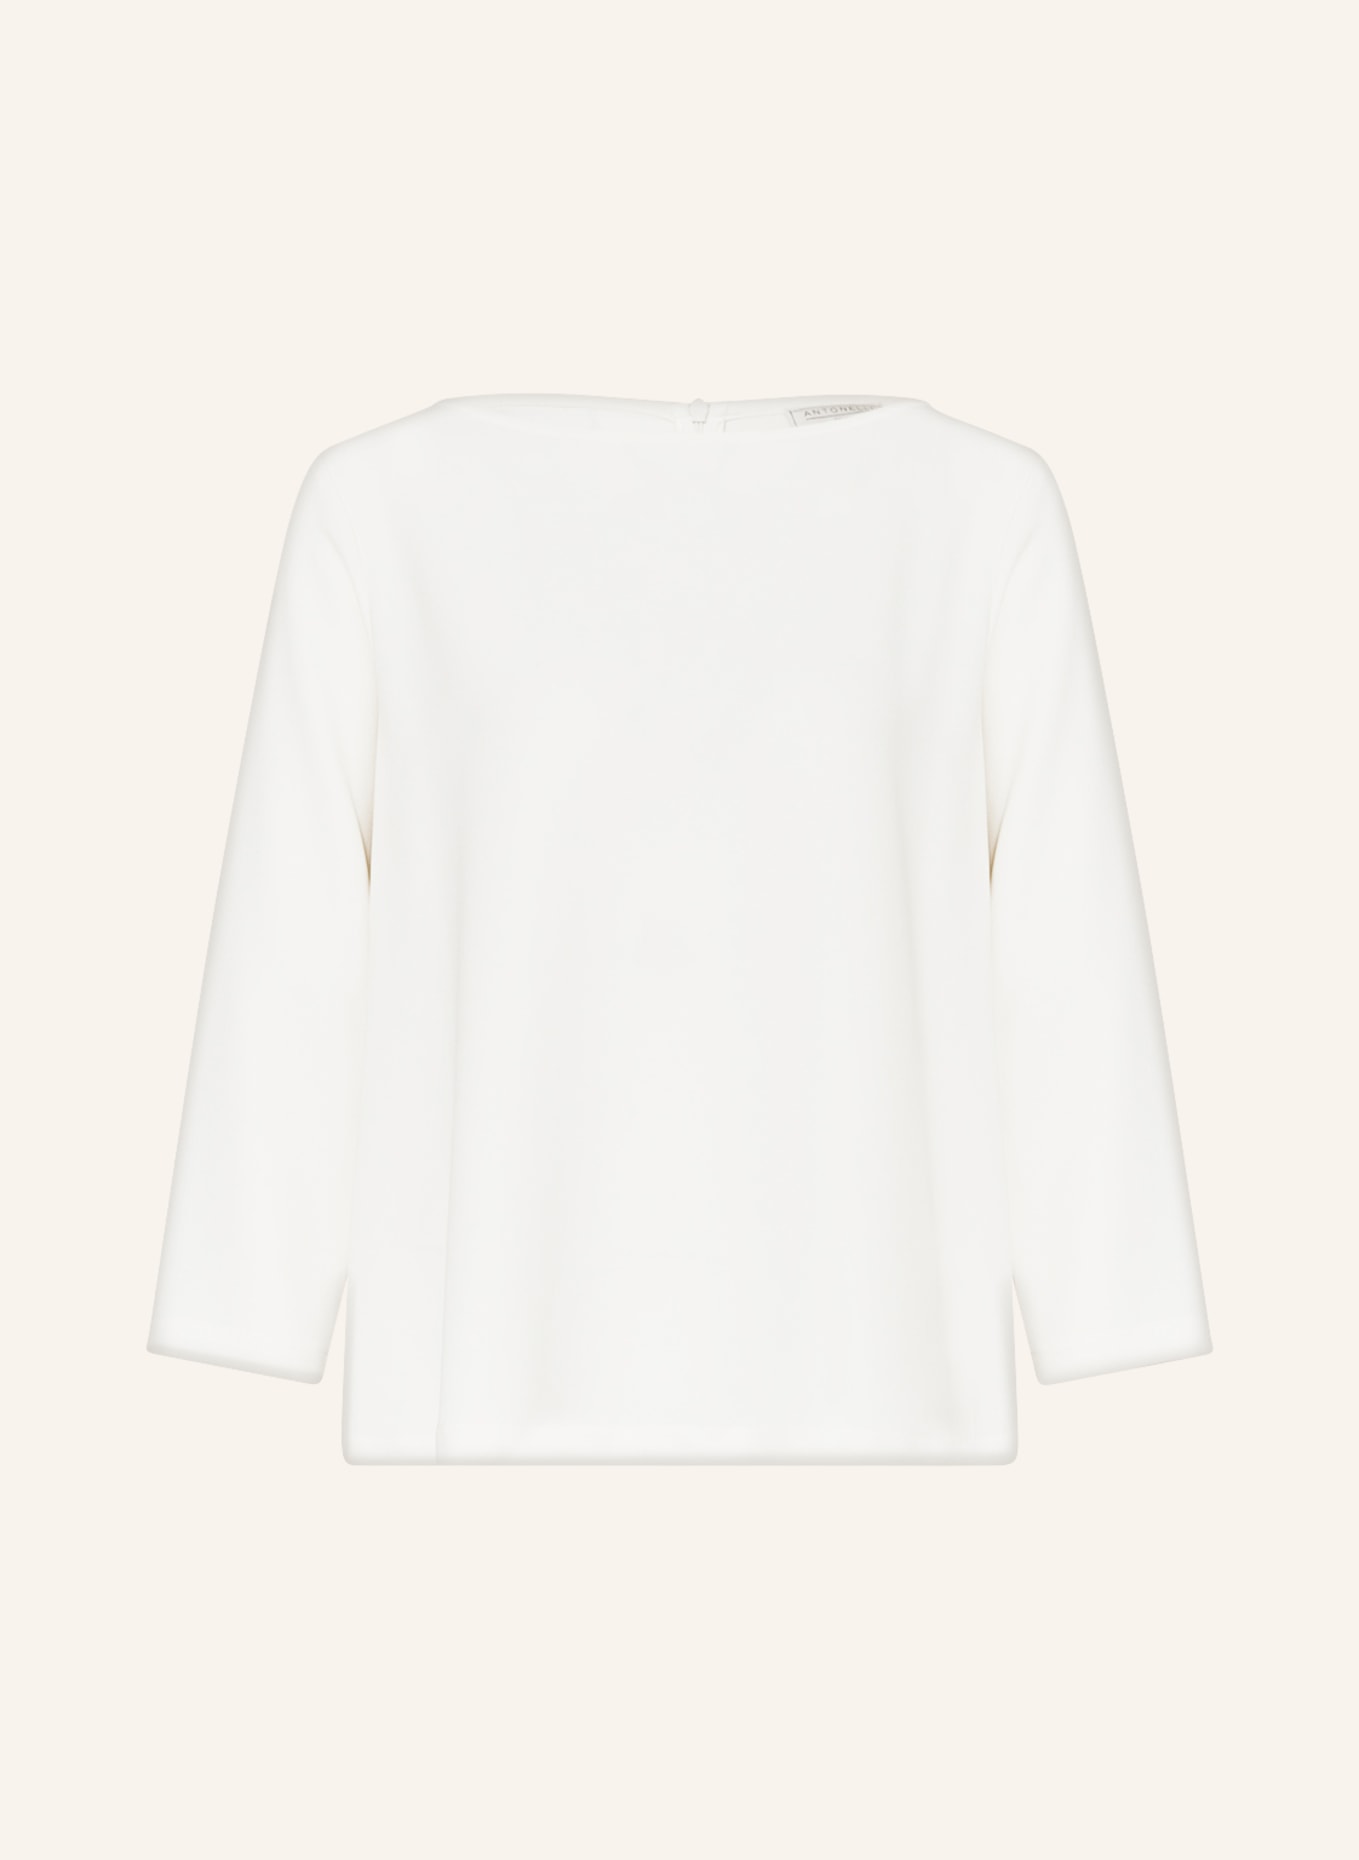 ANTONELLI firenze Shirt blouse with 3/4 sleeves, Color: WHITE (Image 1)